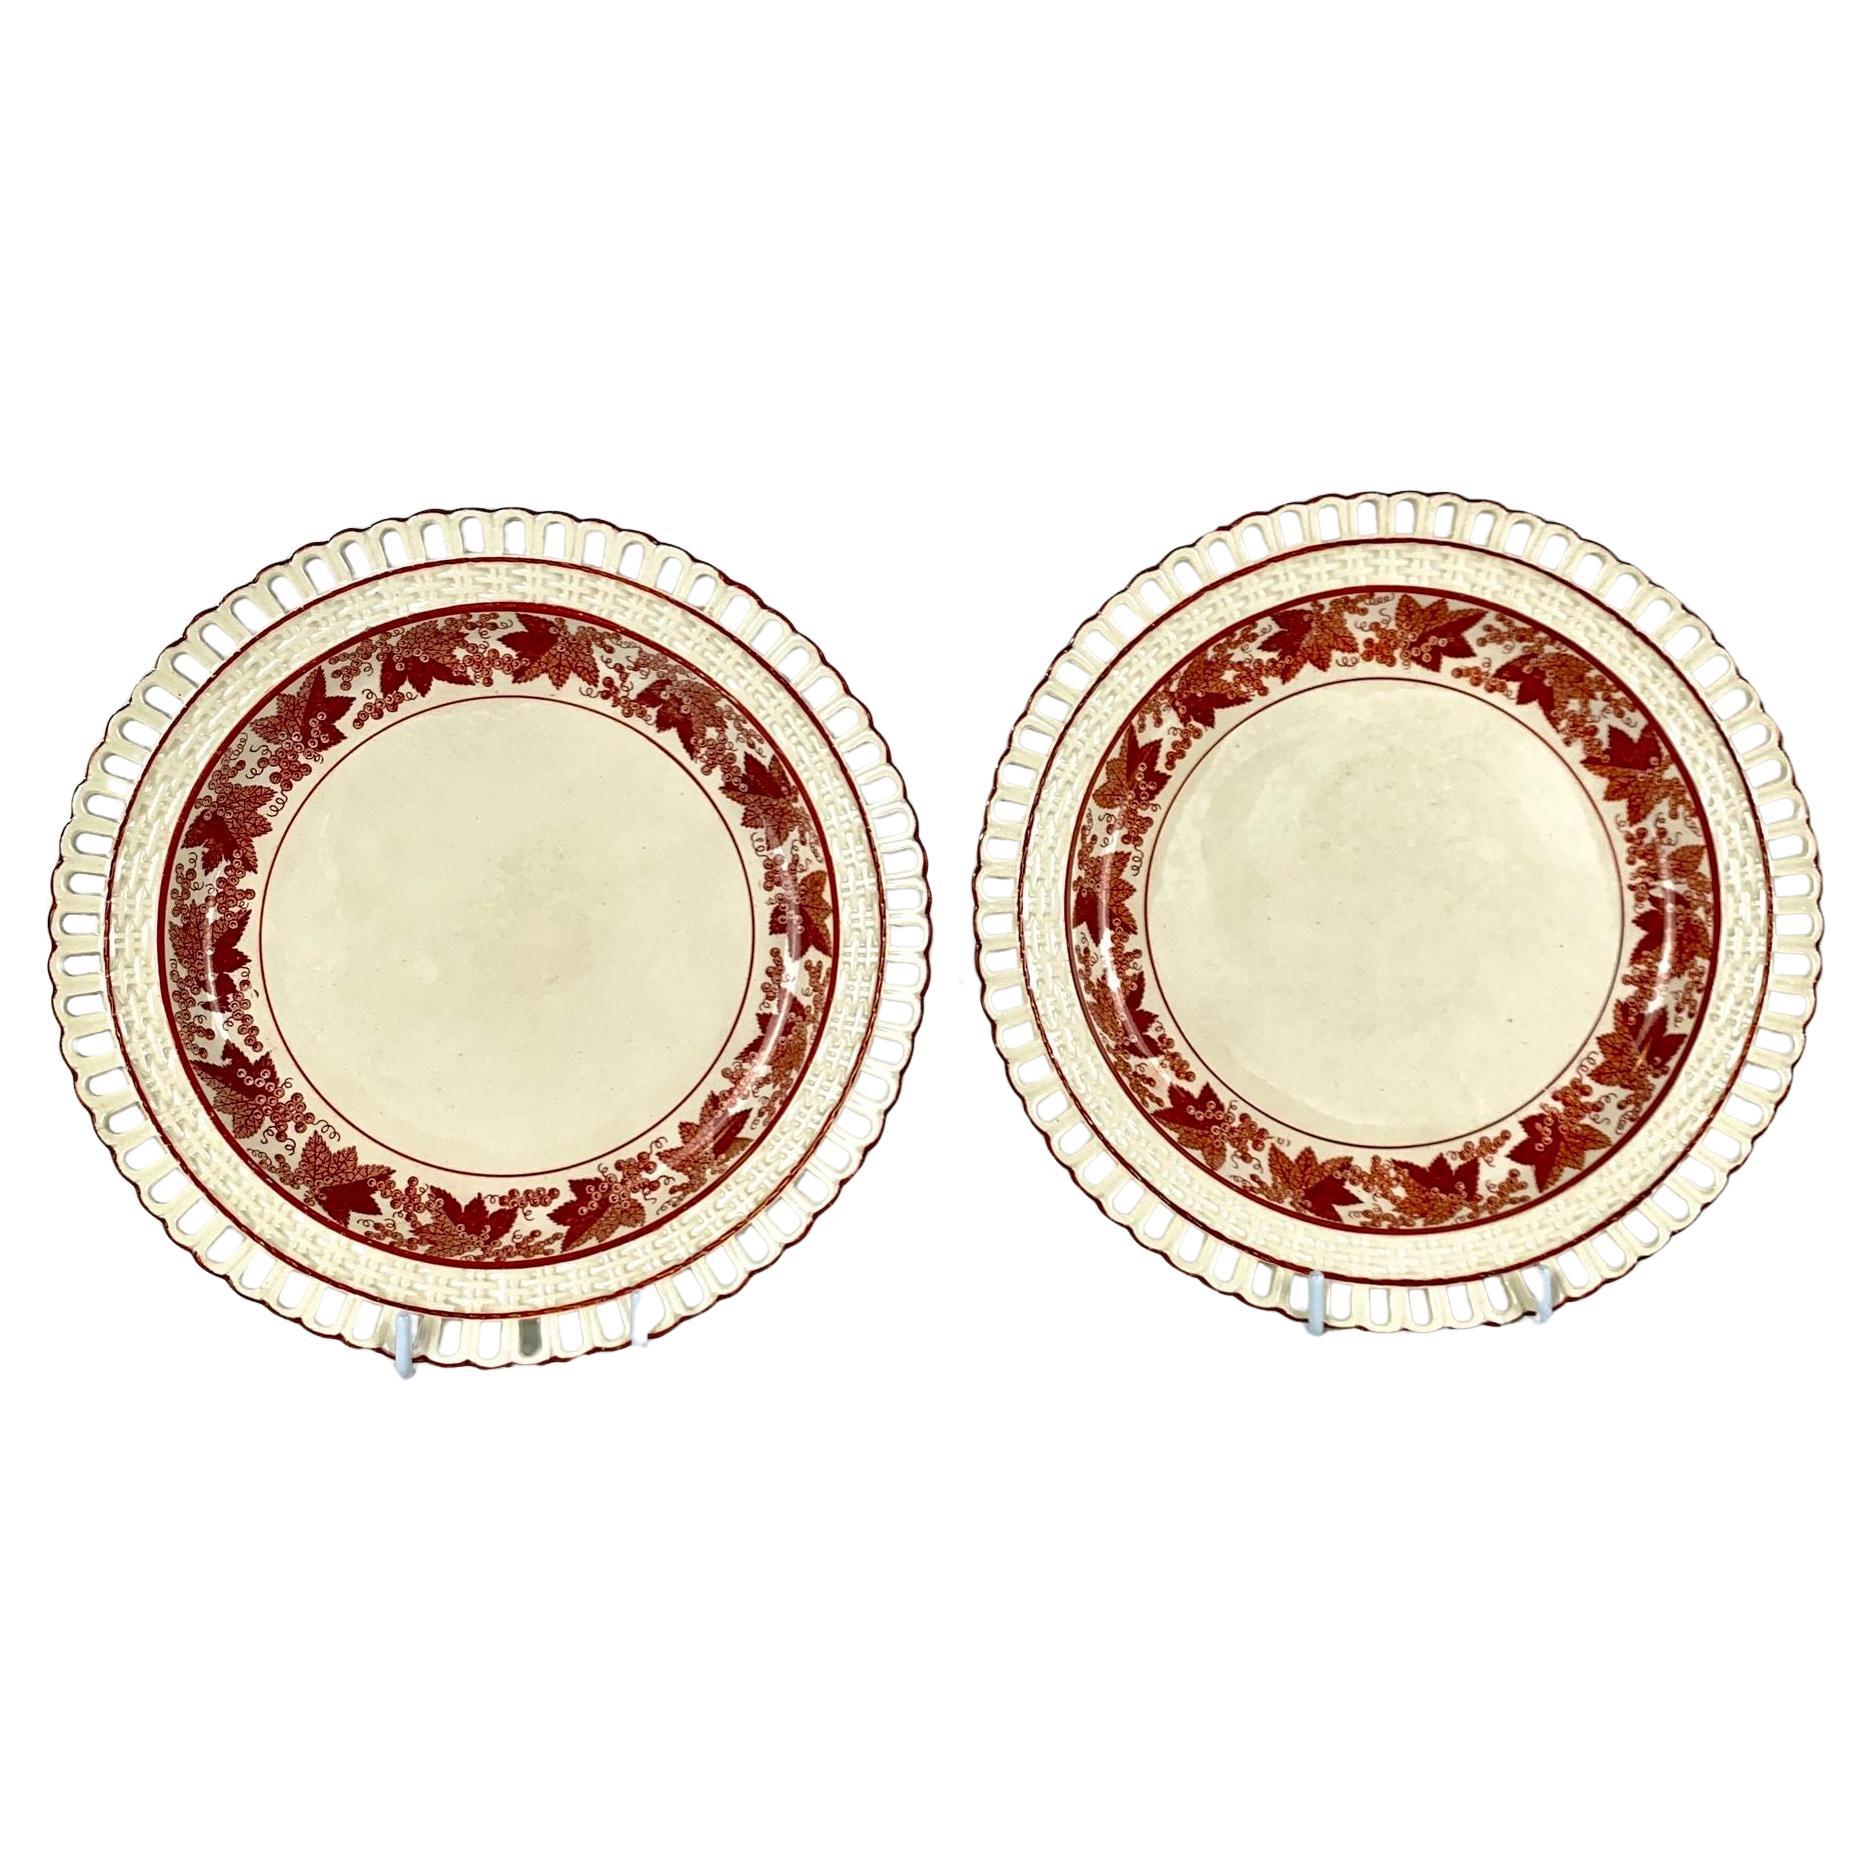 Pair Creamware Dessert Dishes with Sepia Decoration England Circa 1810 For Sale